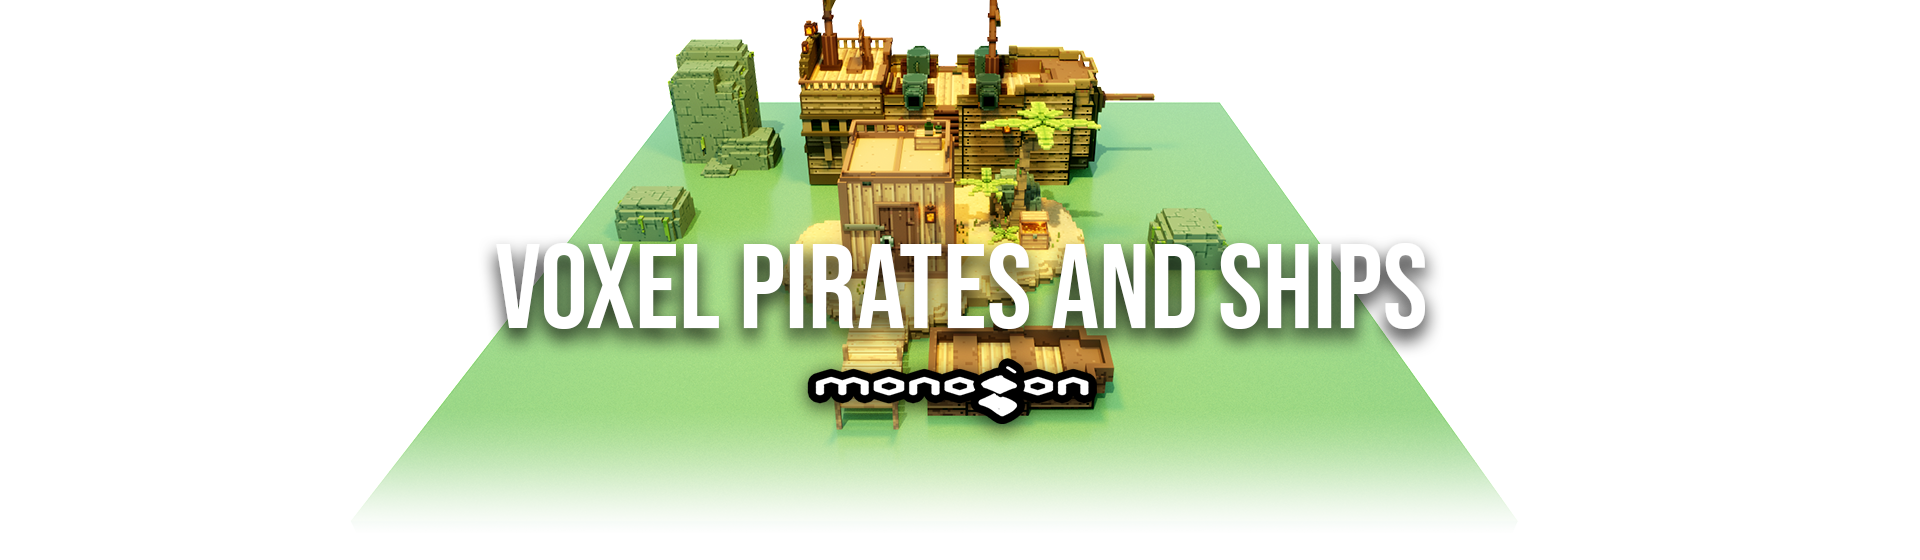 Voxel Pirates and Ships - monogon